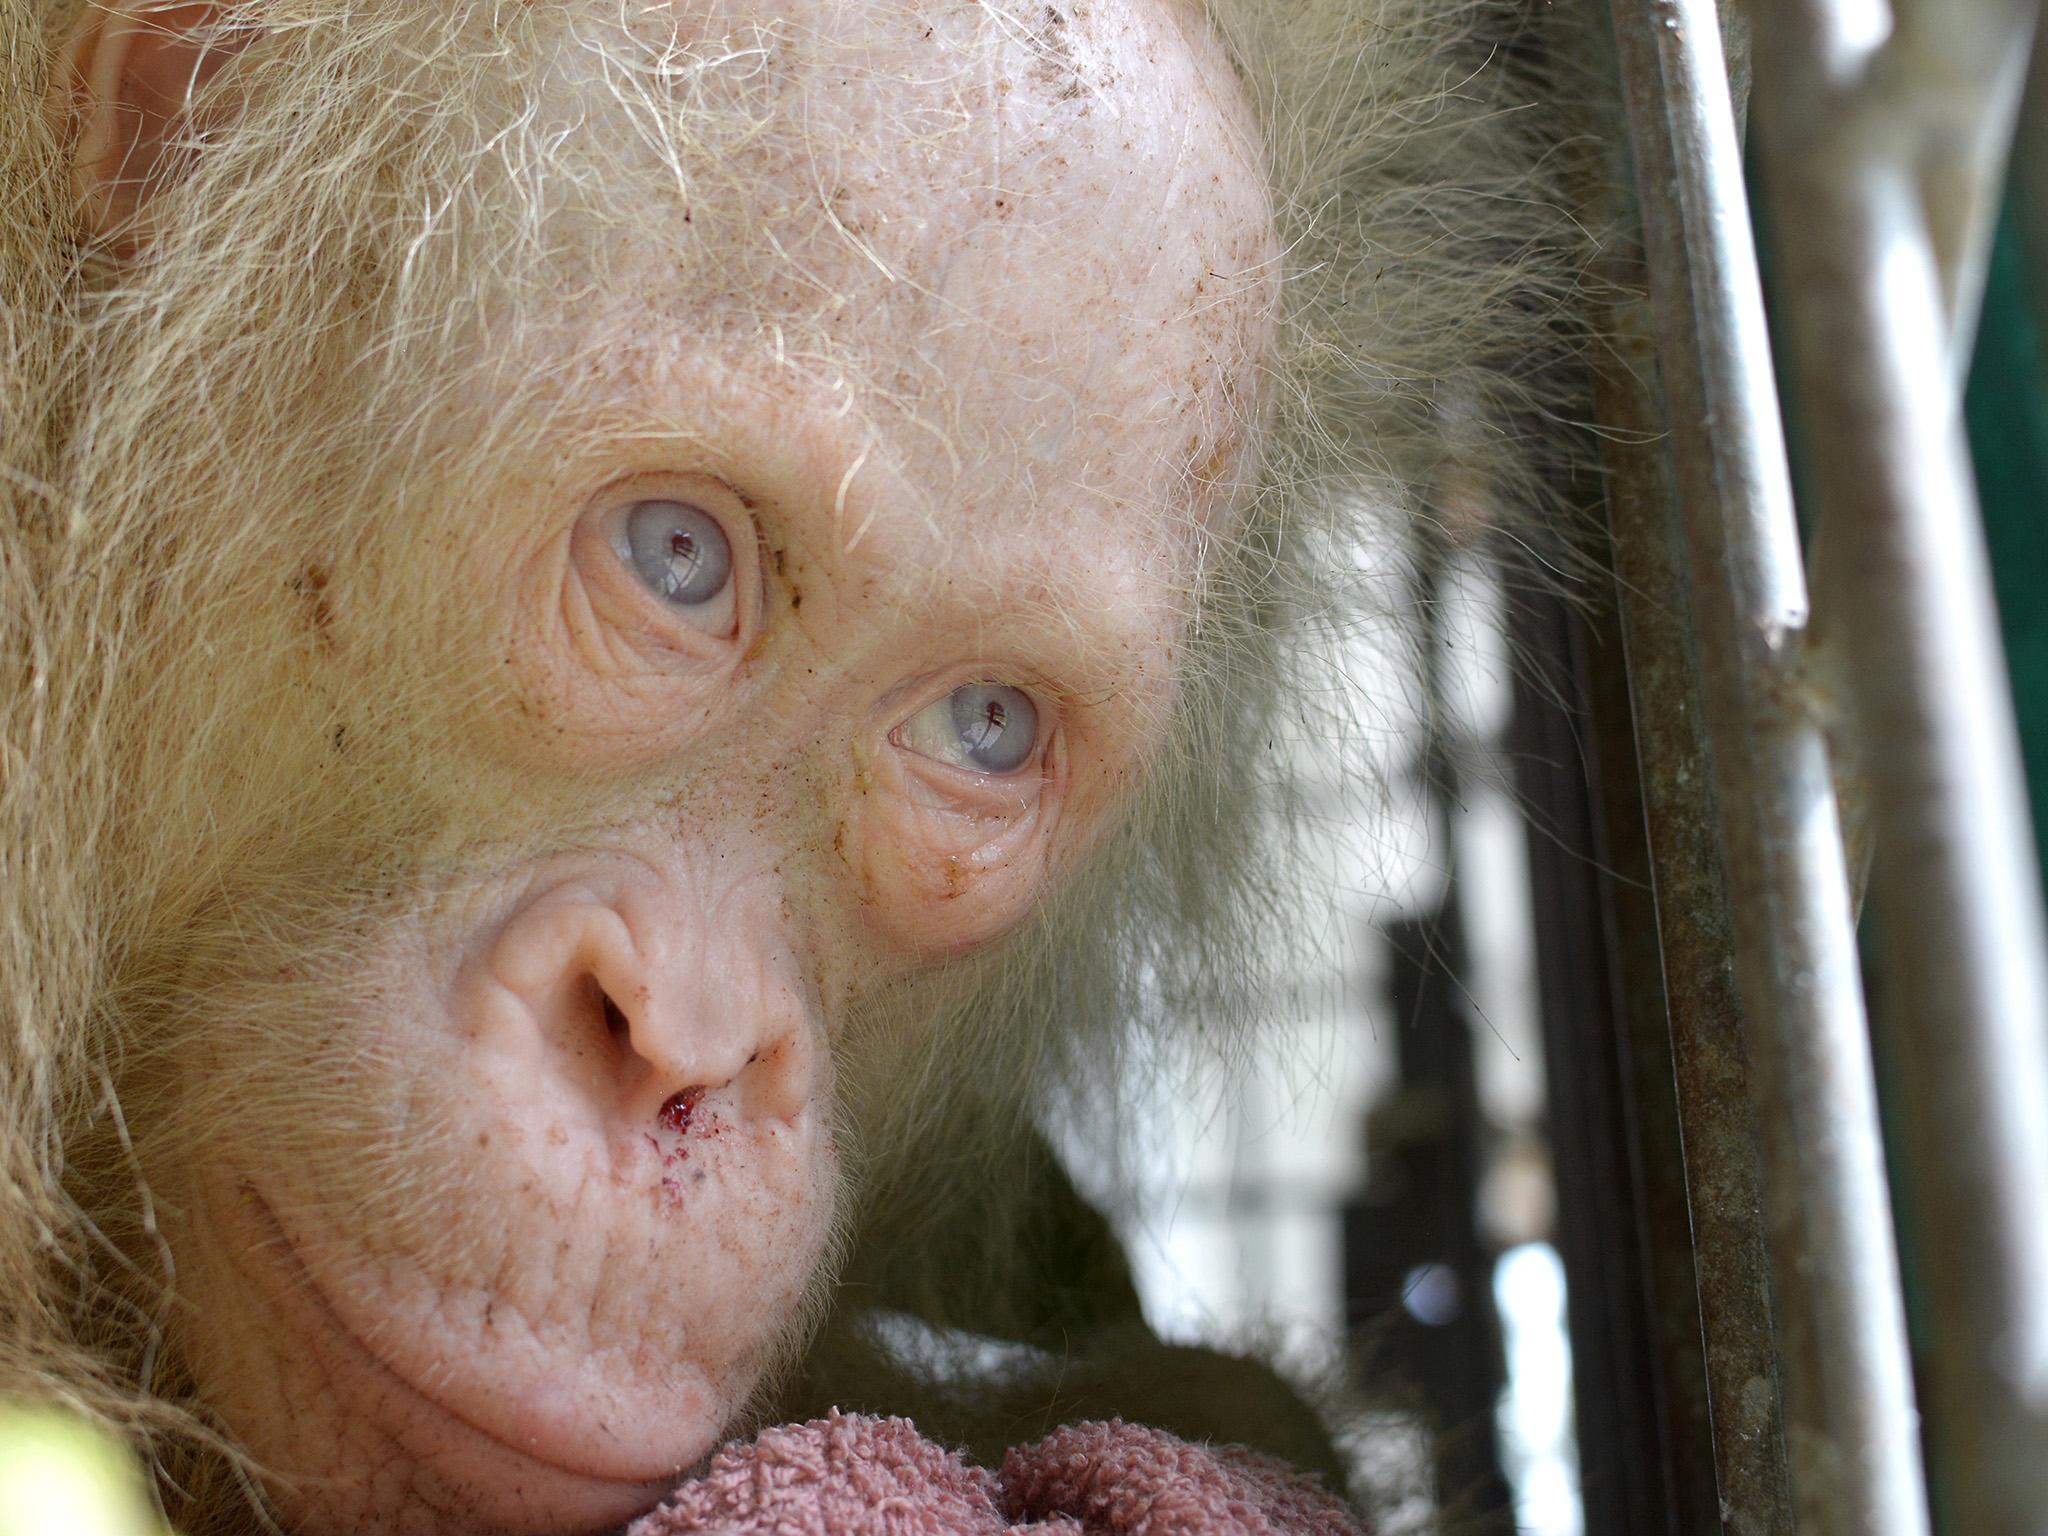 Rare Albino Orangutan With Pale Blonde Hair And Blue Eyes Rescued